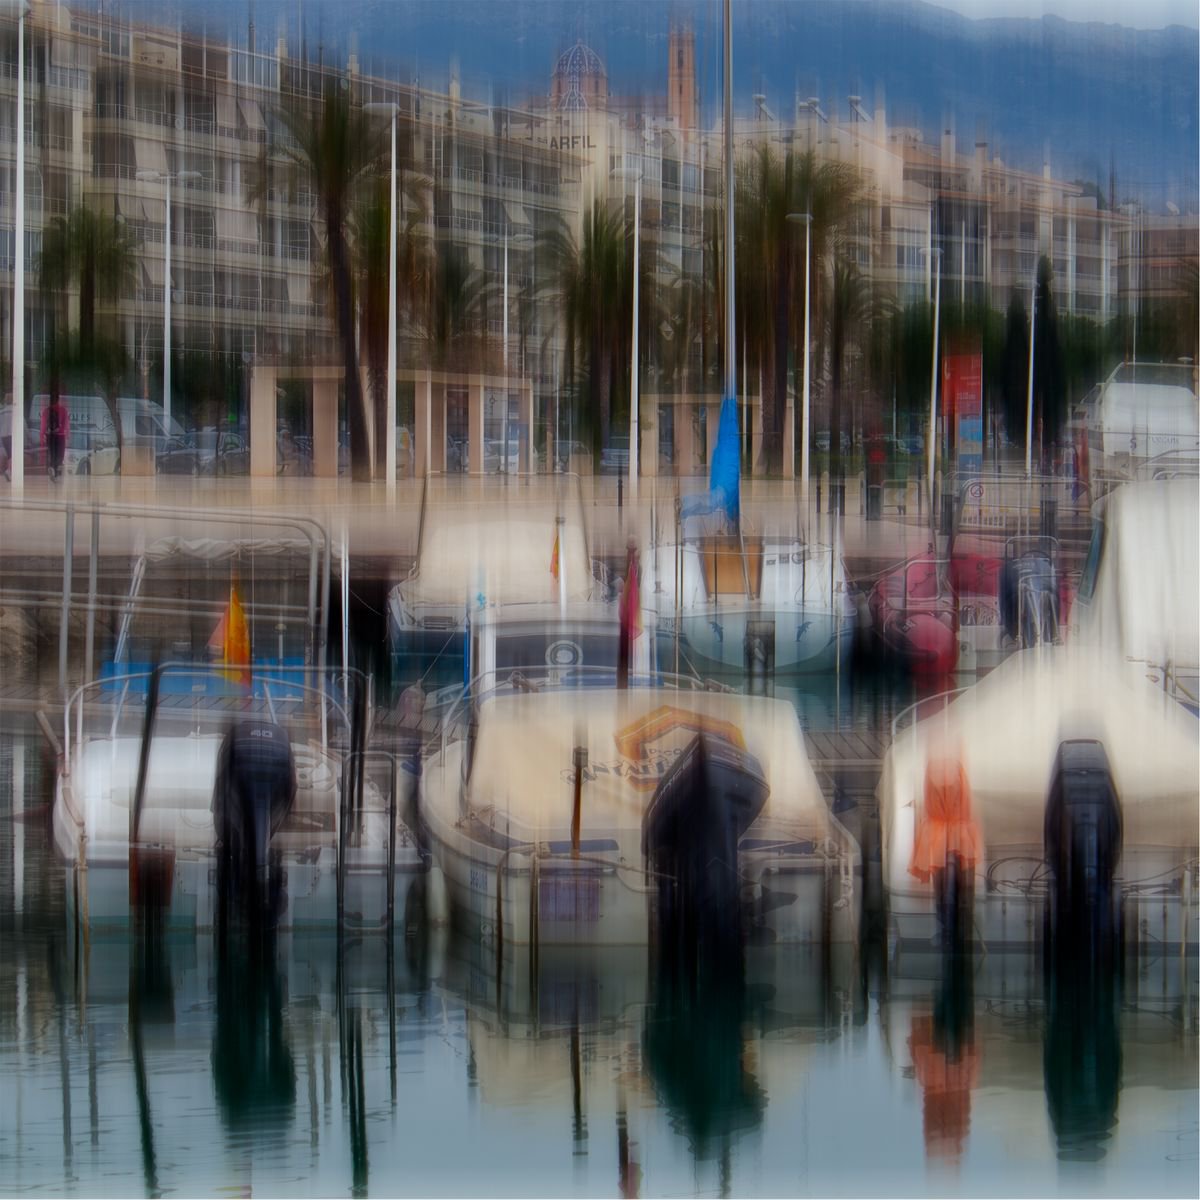 Boating Marina #3 Limited Edition 1/50 10x10 inch Photographic Print. by Graham Briggs